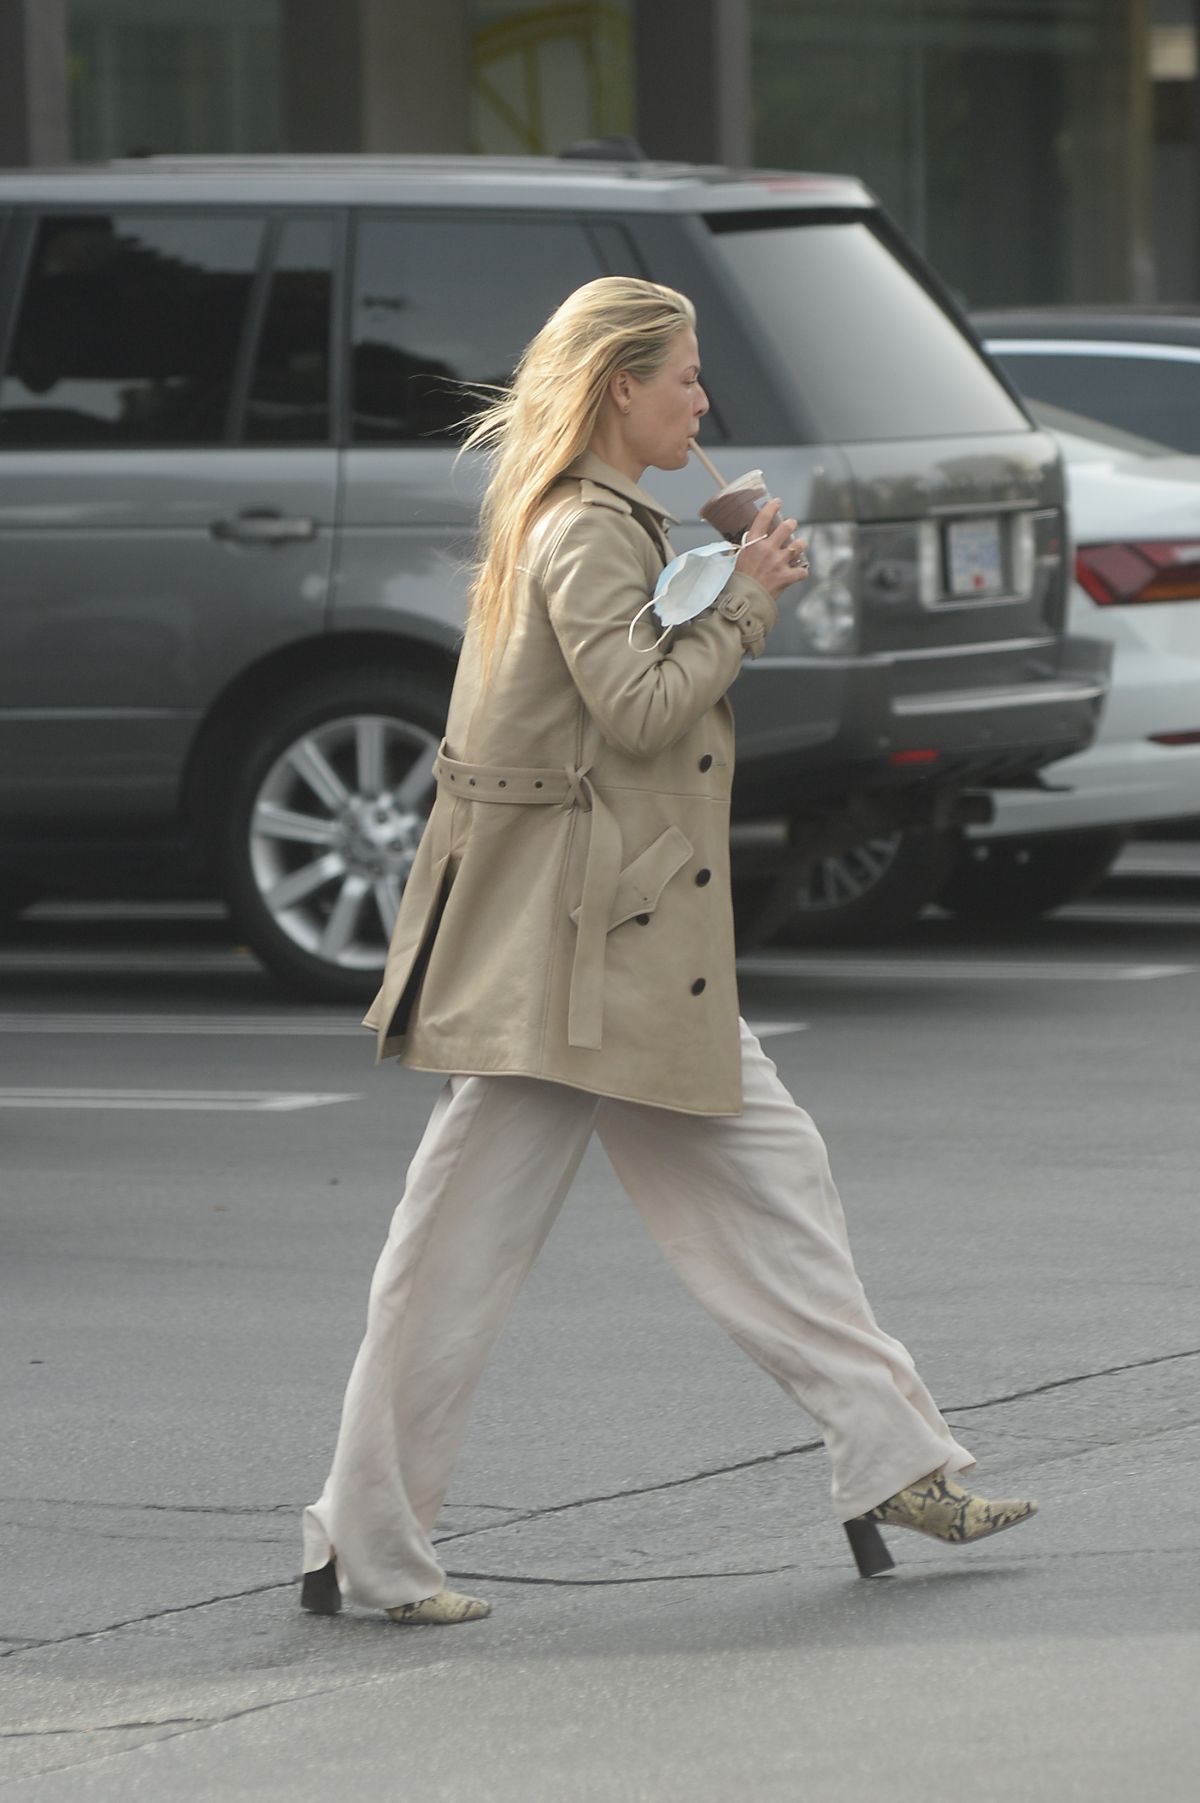 ali-larter-out-and-about-in-los-angeles-11-20-2020-6.jpg